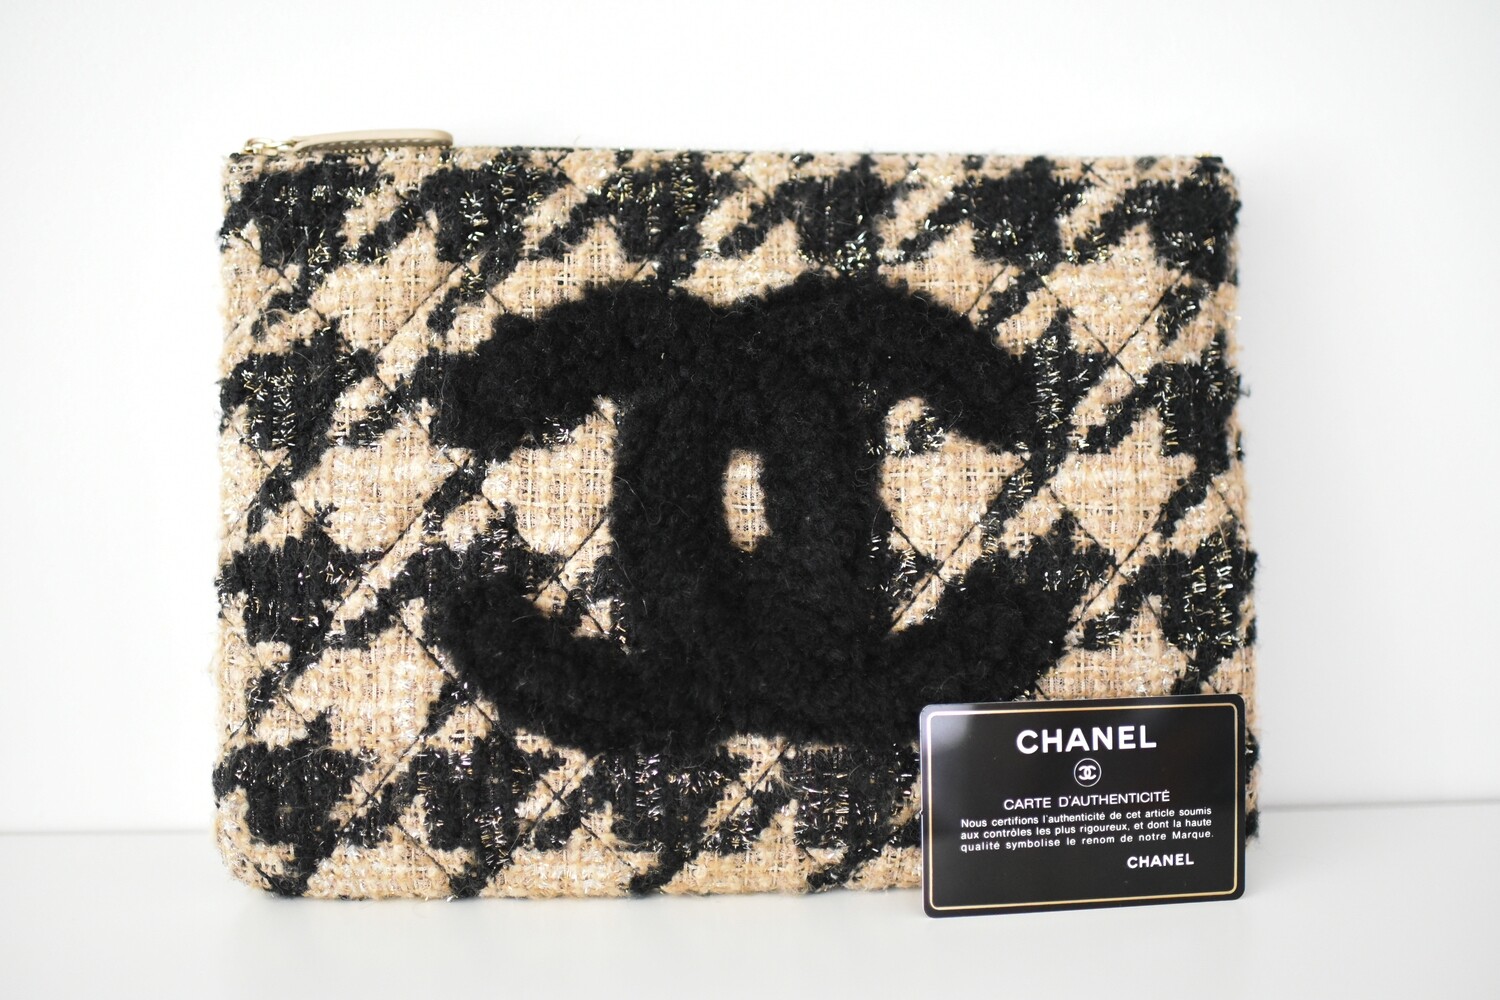 Chanel SLG O Case Medium 19 Medium, Beige and Black Houndstooth Tweed,  Preowned in Box